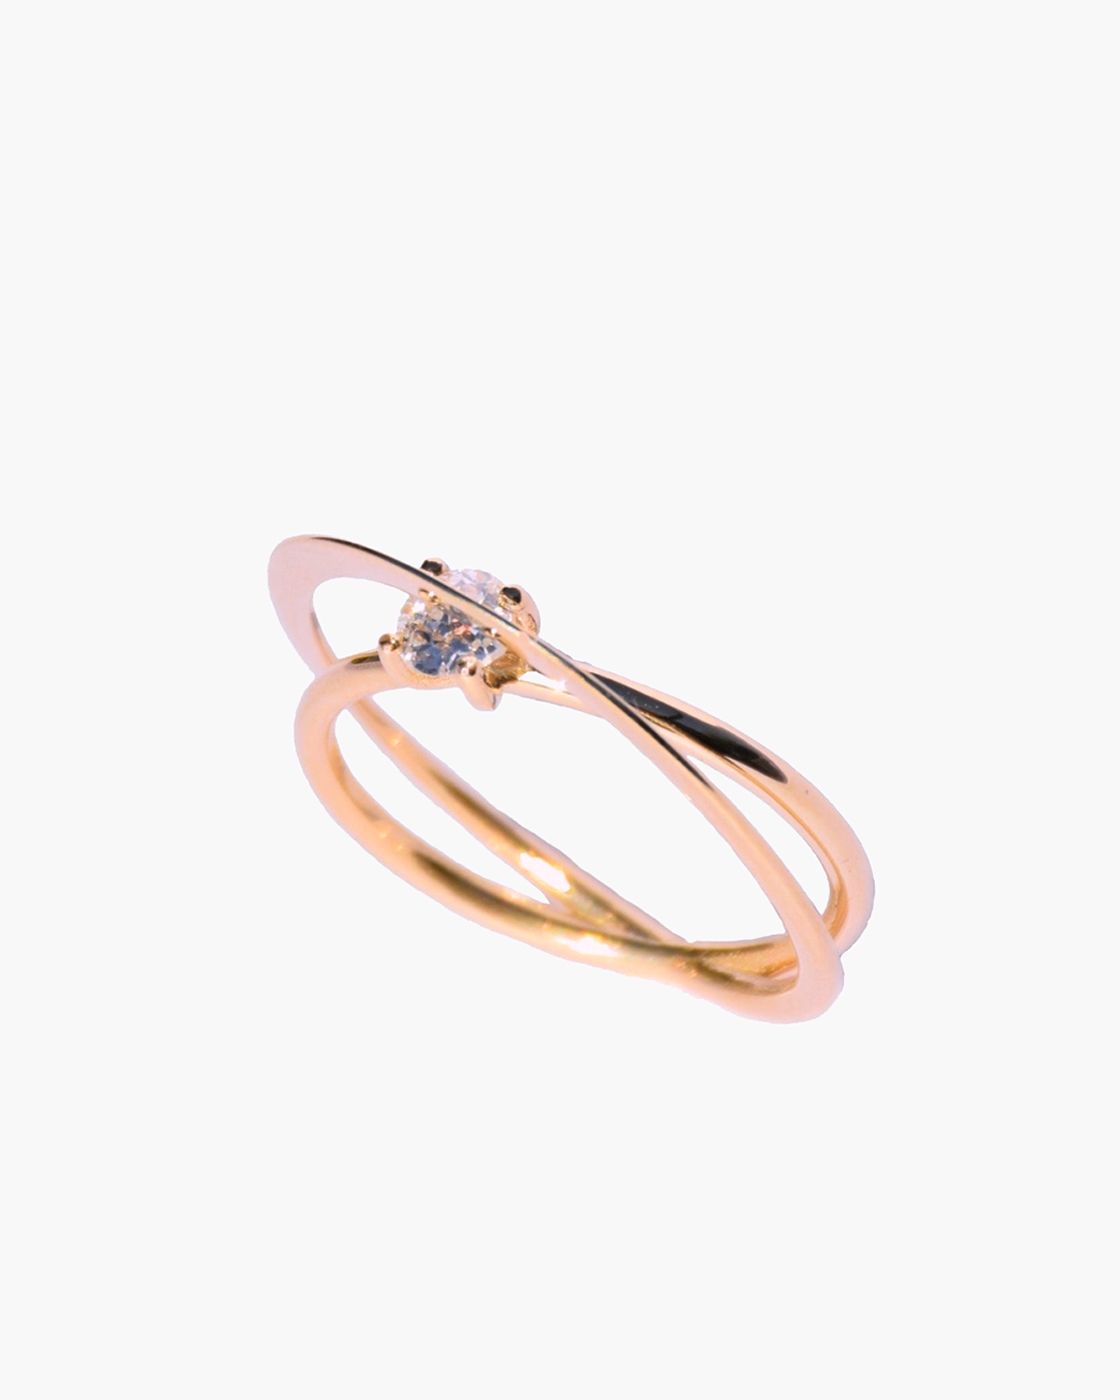 Full Moon Pink Gold Diamond Solitaire Ring (Lab-grown)